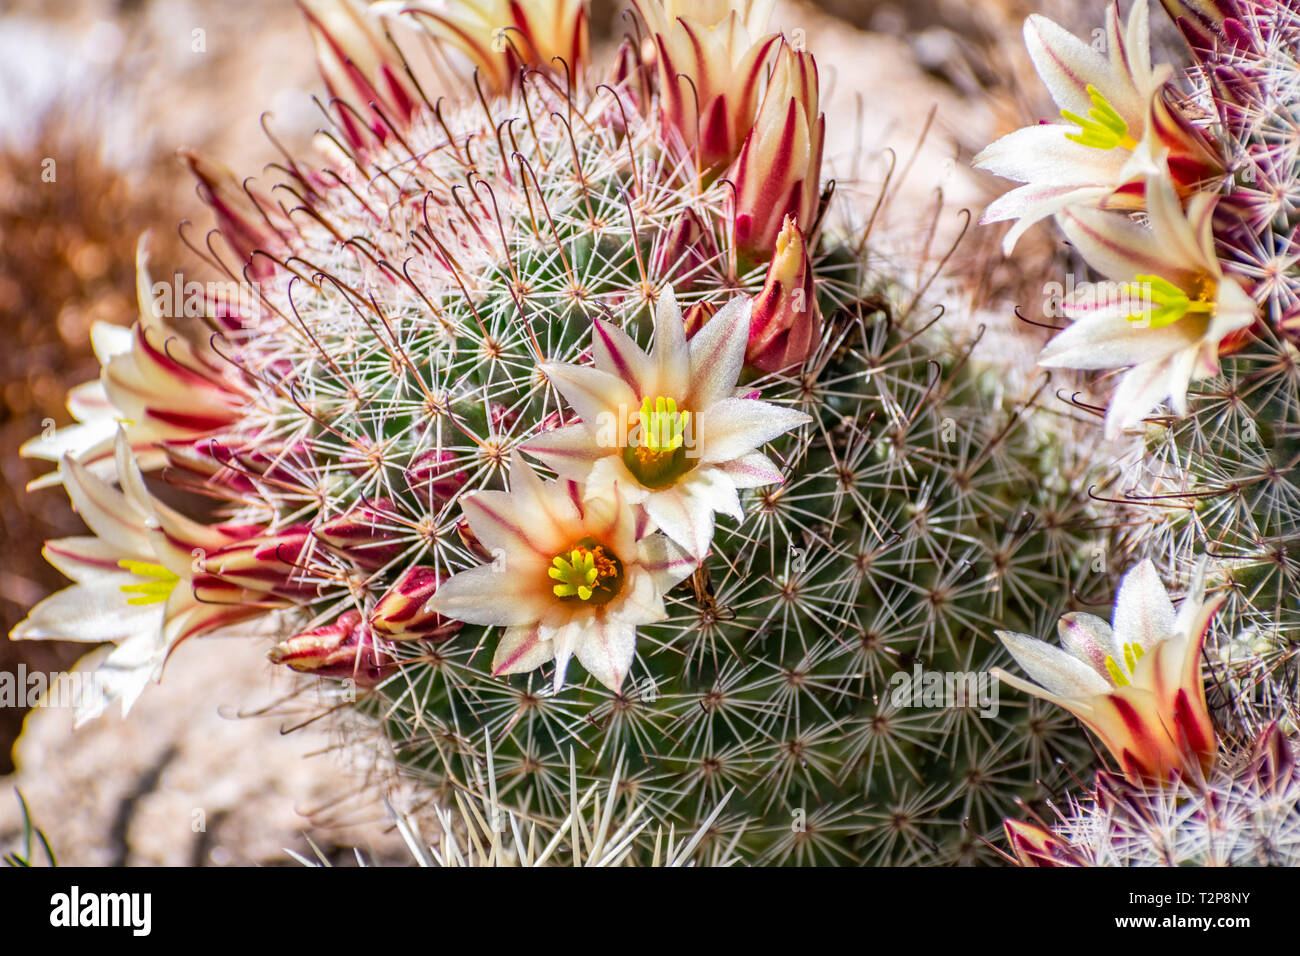 Mammillaria dioica  (also called the strawberry cactus, California fishhook cactus, strawberry pincushion or fishhook cactus) blooming in Anza Borrego Stock Photo